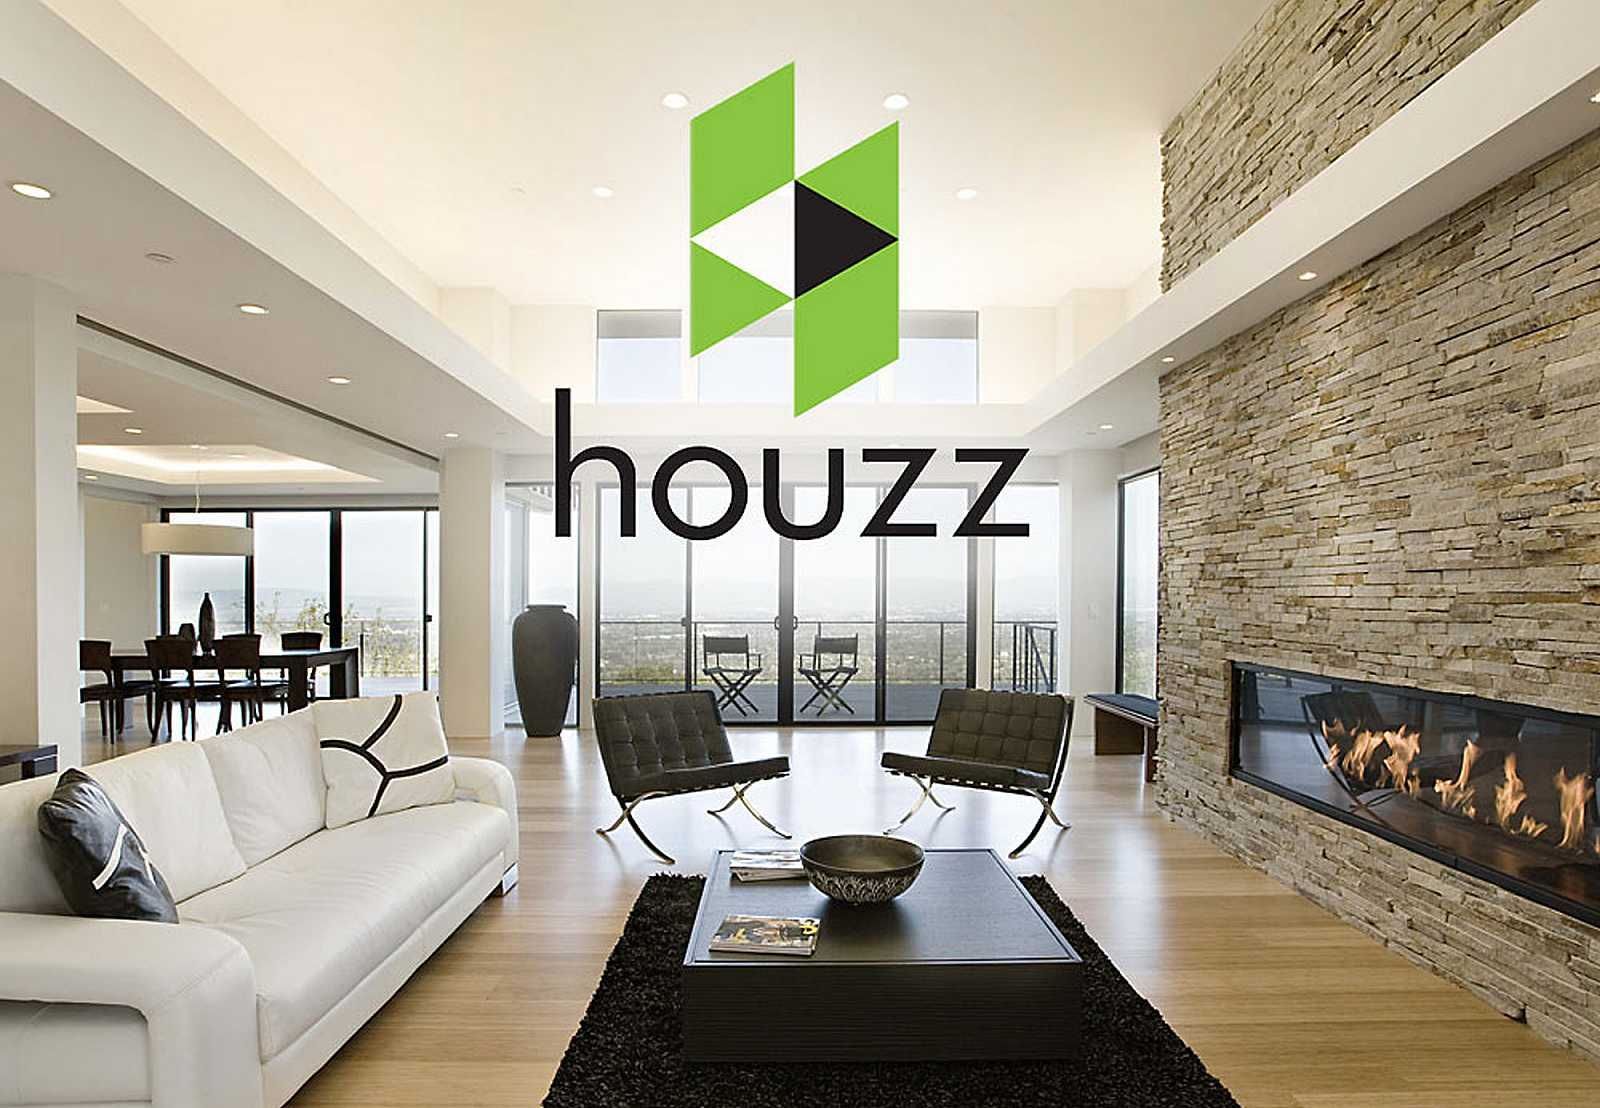 A living room with a houzz logo above it